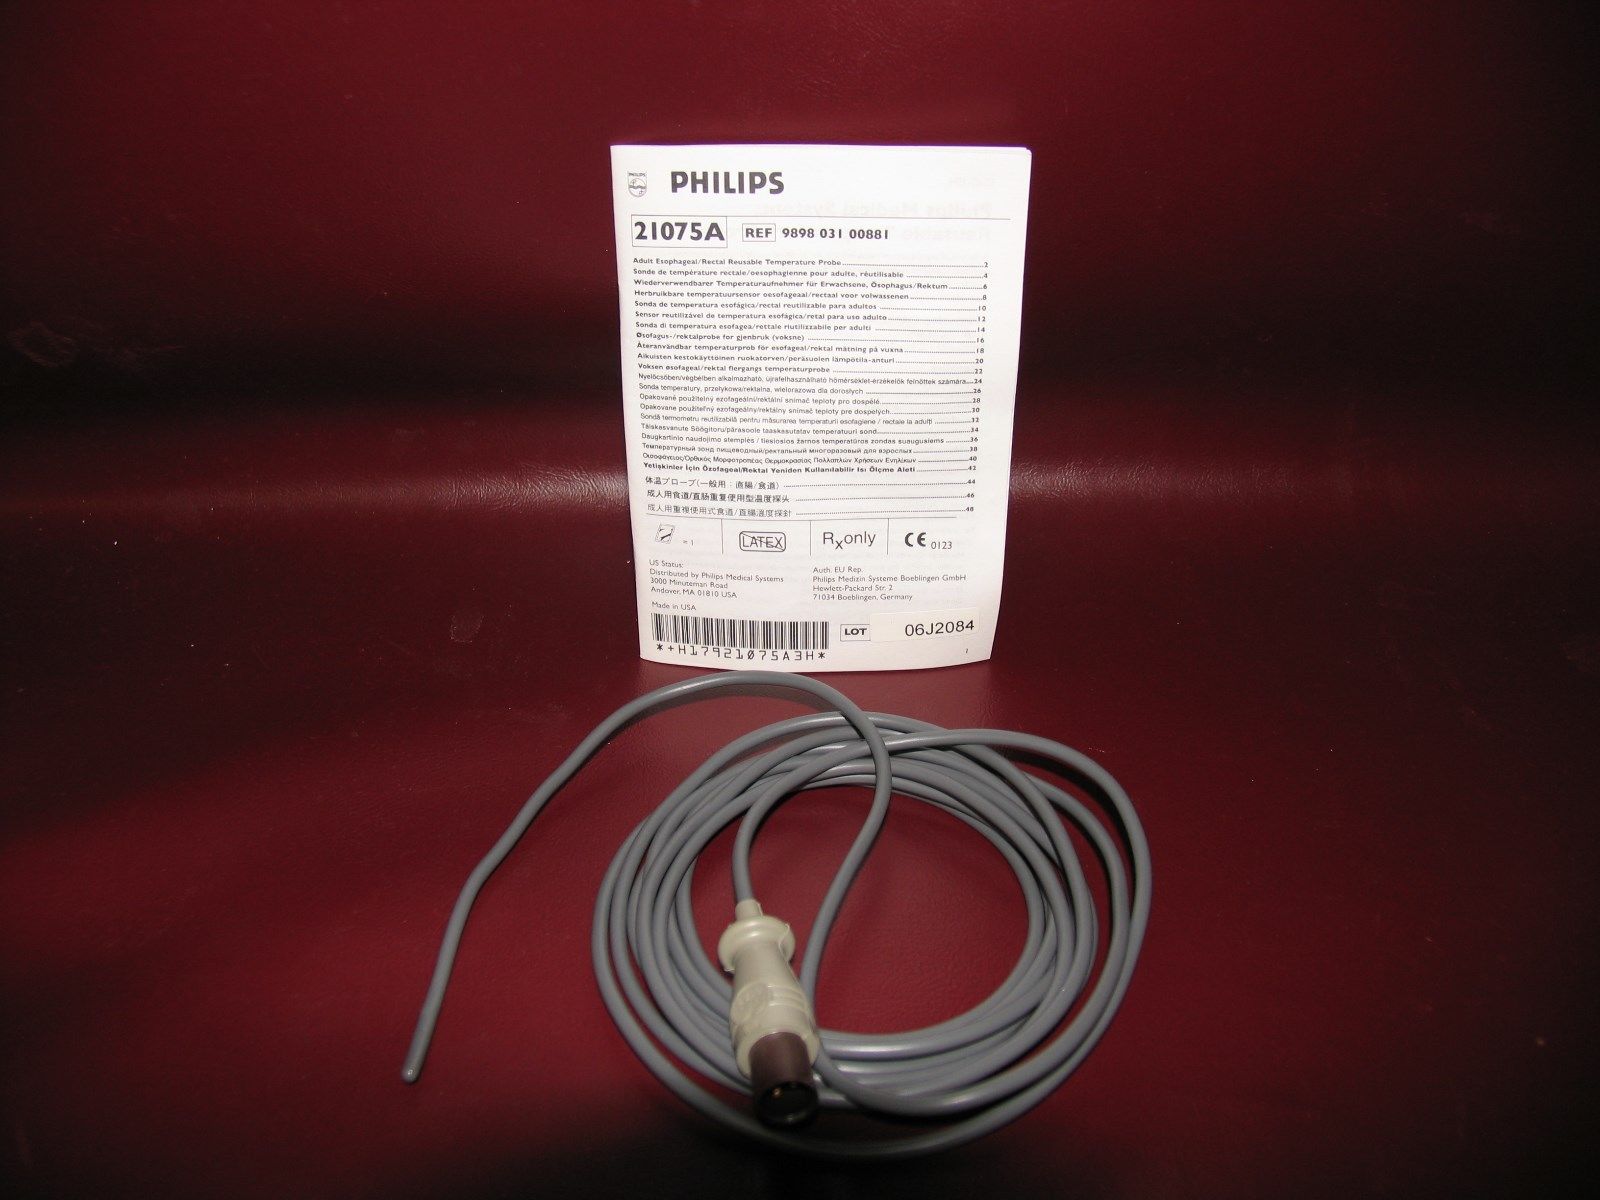 PHILIPS PATIENT MONITOR 21075A ADULT ESOPHAGEAL/RECTAL TEMP PROBE DIAGNOSTIC ULTRASOUND MACHINES FOR SALE